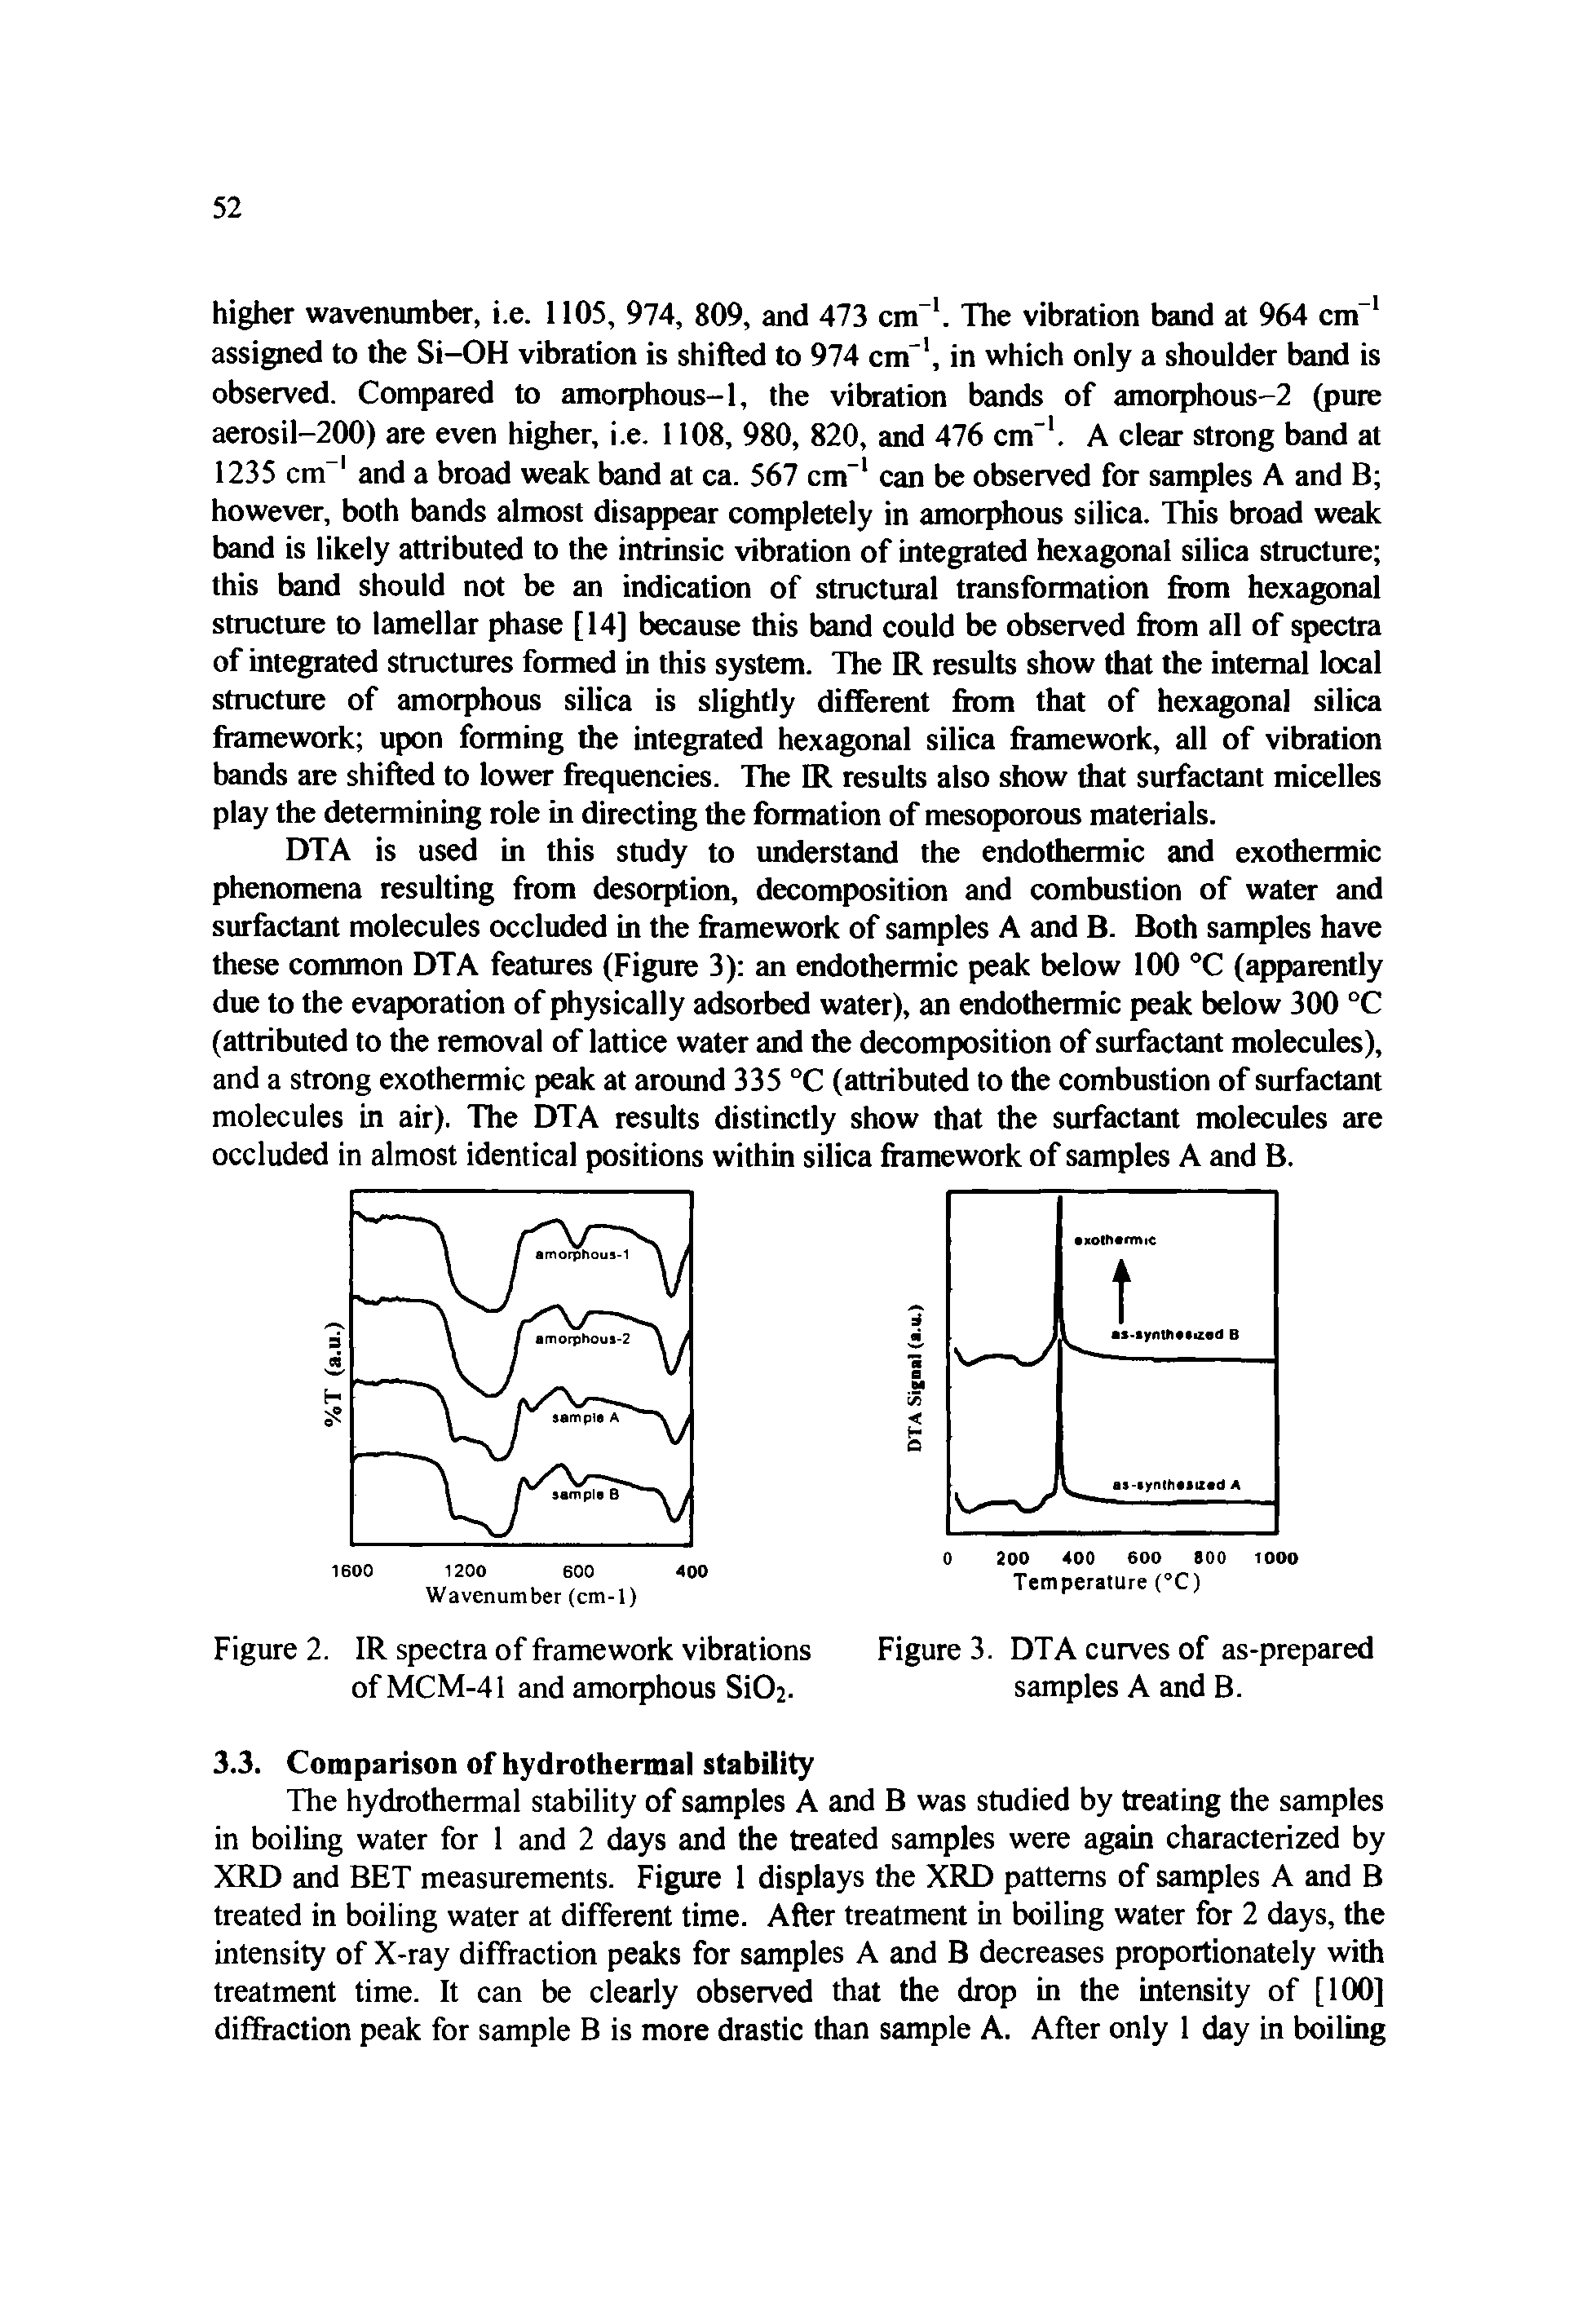 Figure 2. IR spectra of framework vibrations of MCM-41 and amorphous Si02-...